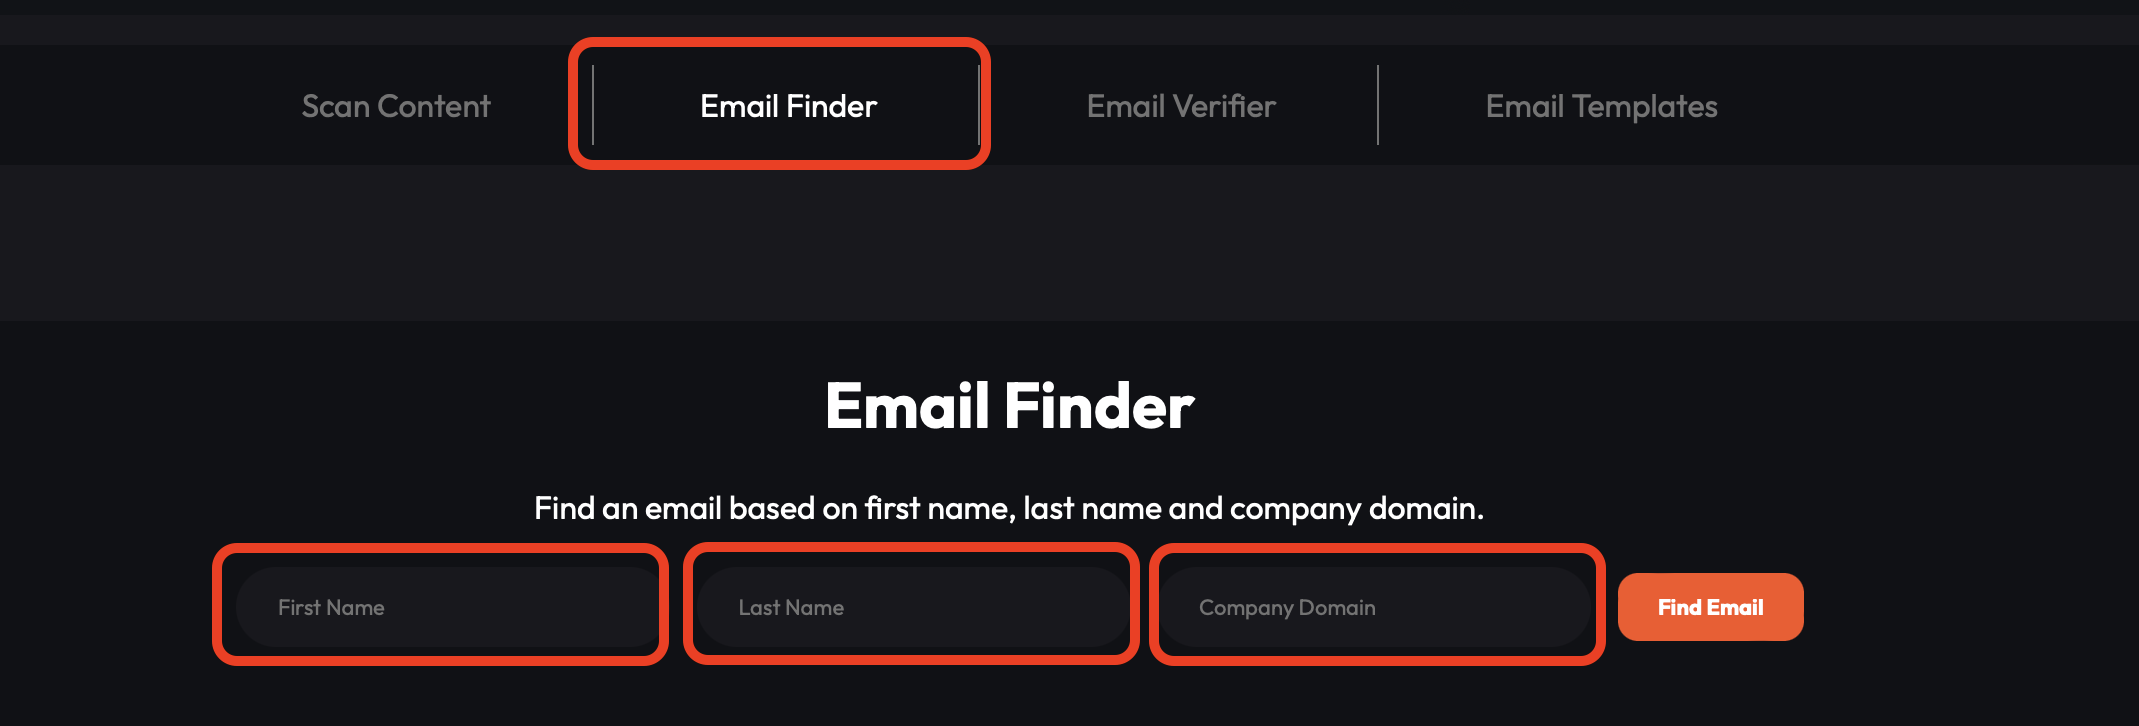 Enter the person’s first and last name and company domain to source their email address using the Mentioned - Outreach Wizard app.